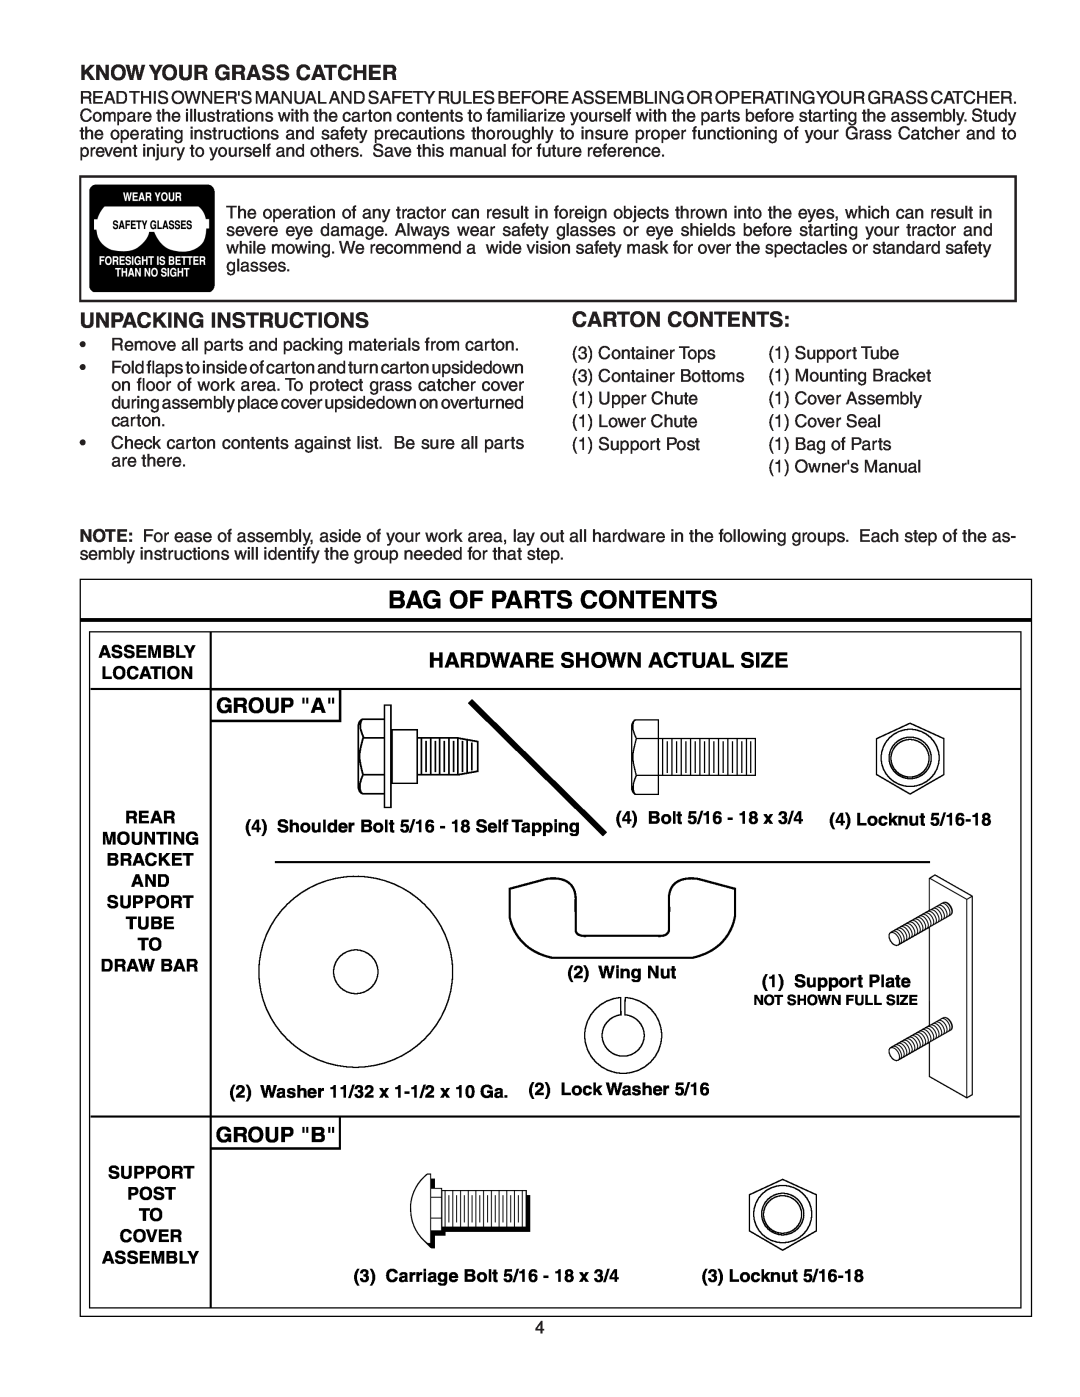 Poulan 954 04 05-03 Bag Of Parts Contents, Know Your Grass Catcher, Unpacking Instructions, Carton Contents, Group A 